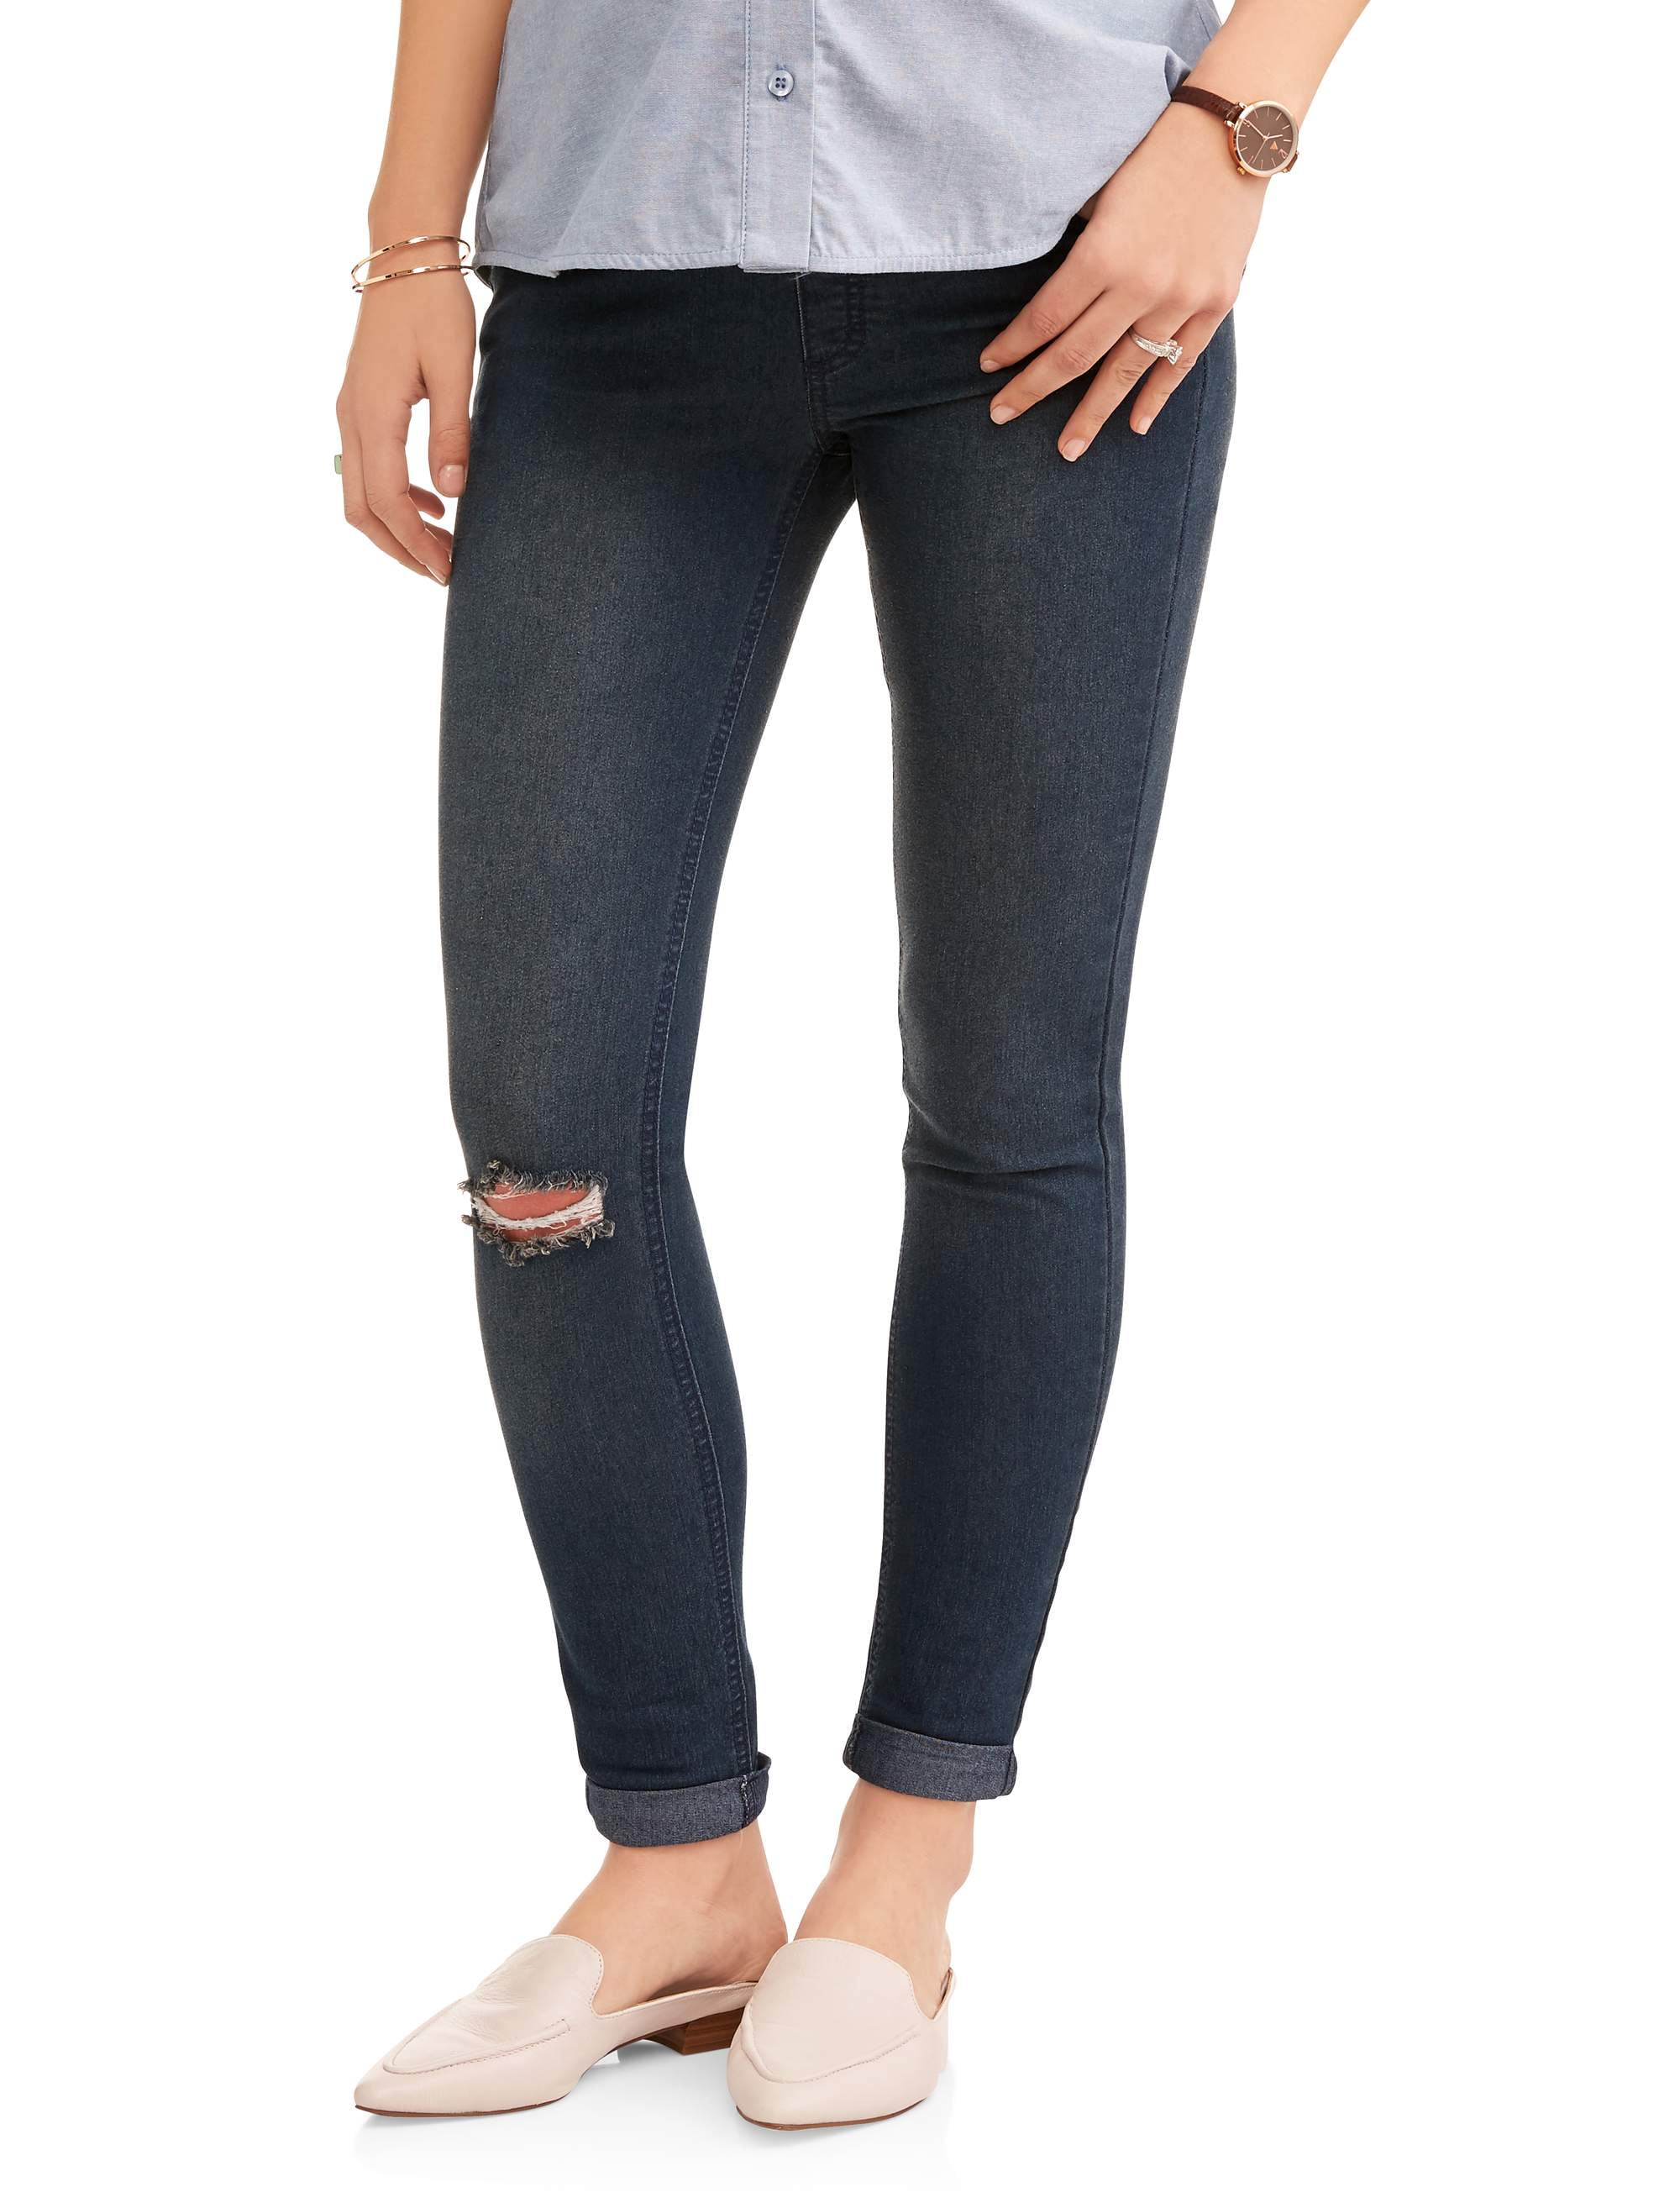 Maternity Oh! Mamma Skinny Jean with Full Panel and Distressing ...